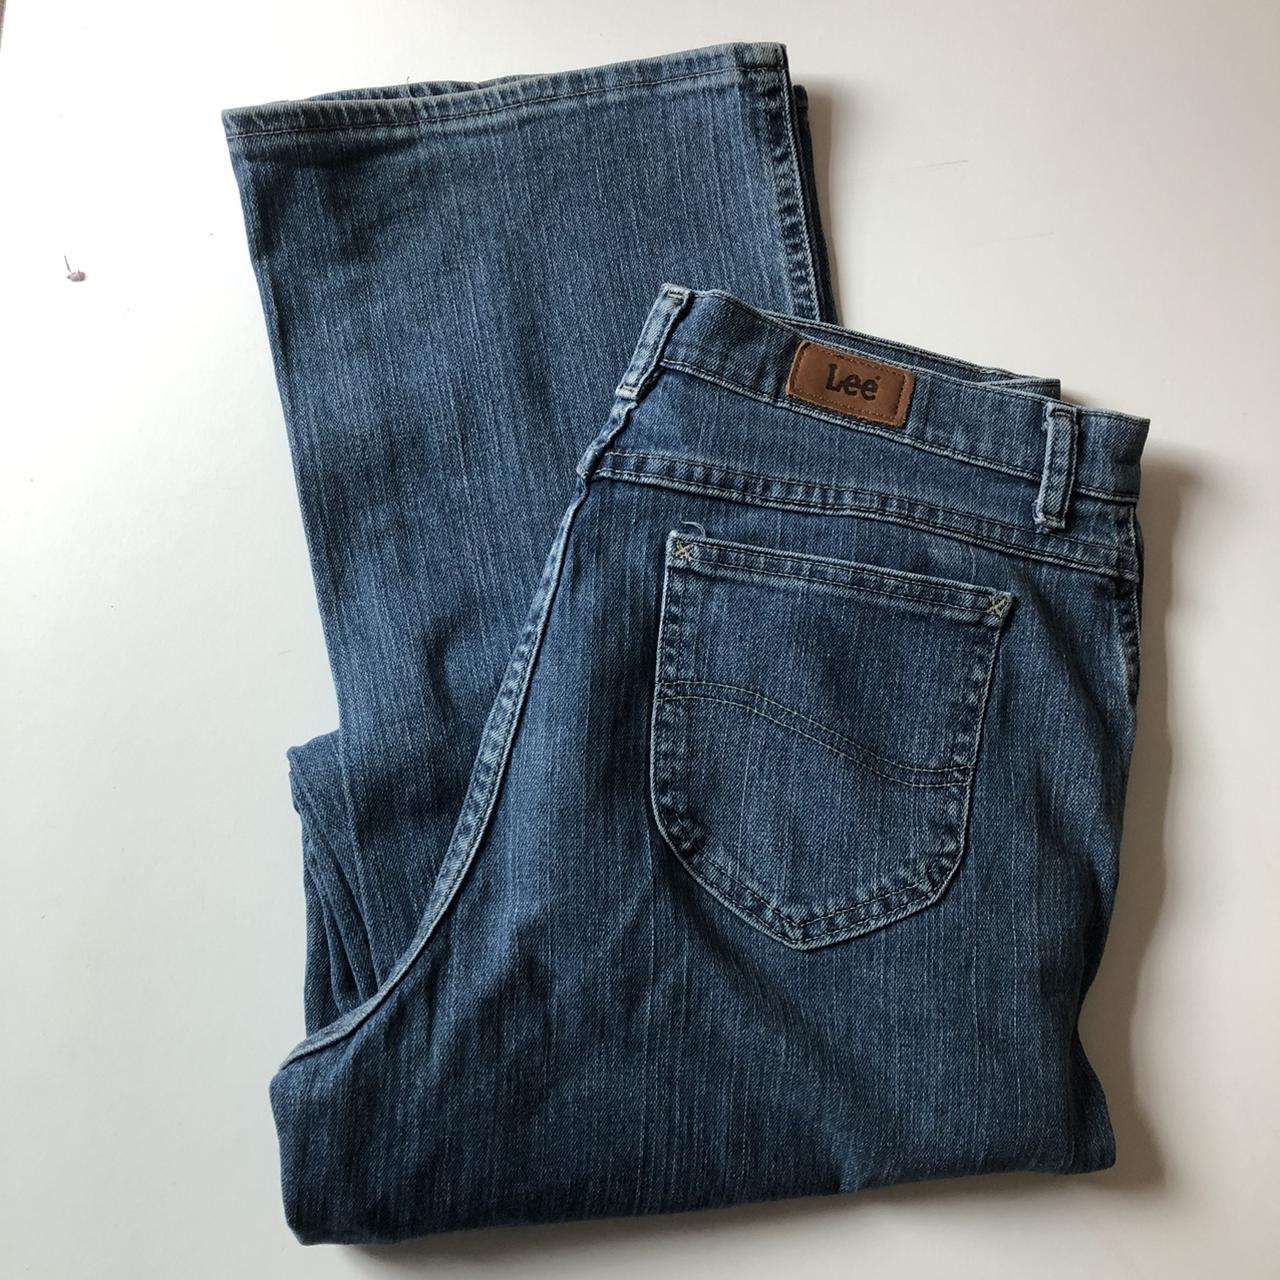 Lee jeans. A classic high waisted vintage! These go... - Depop